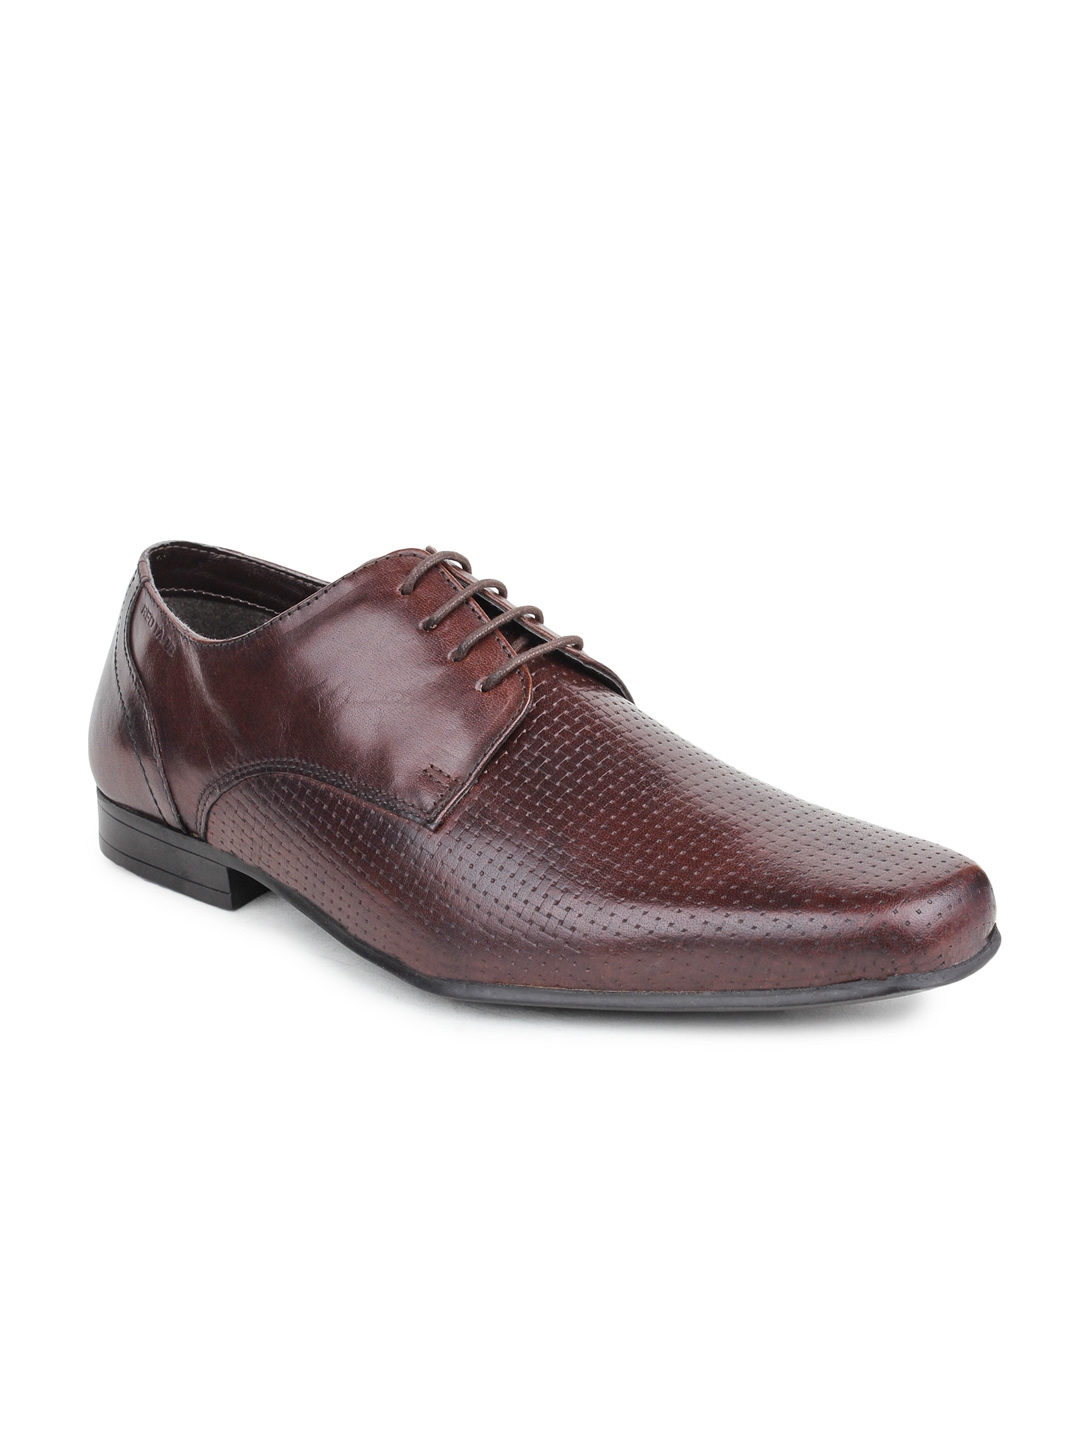 red tape shoes formal shoes